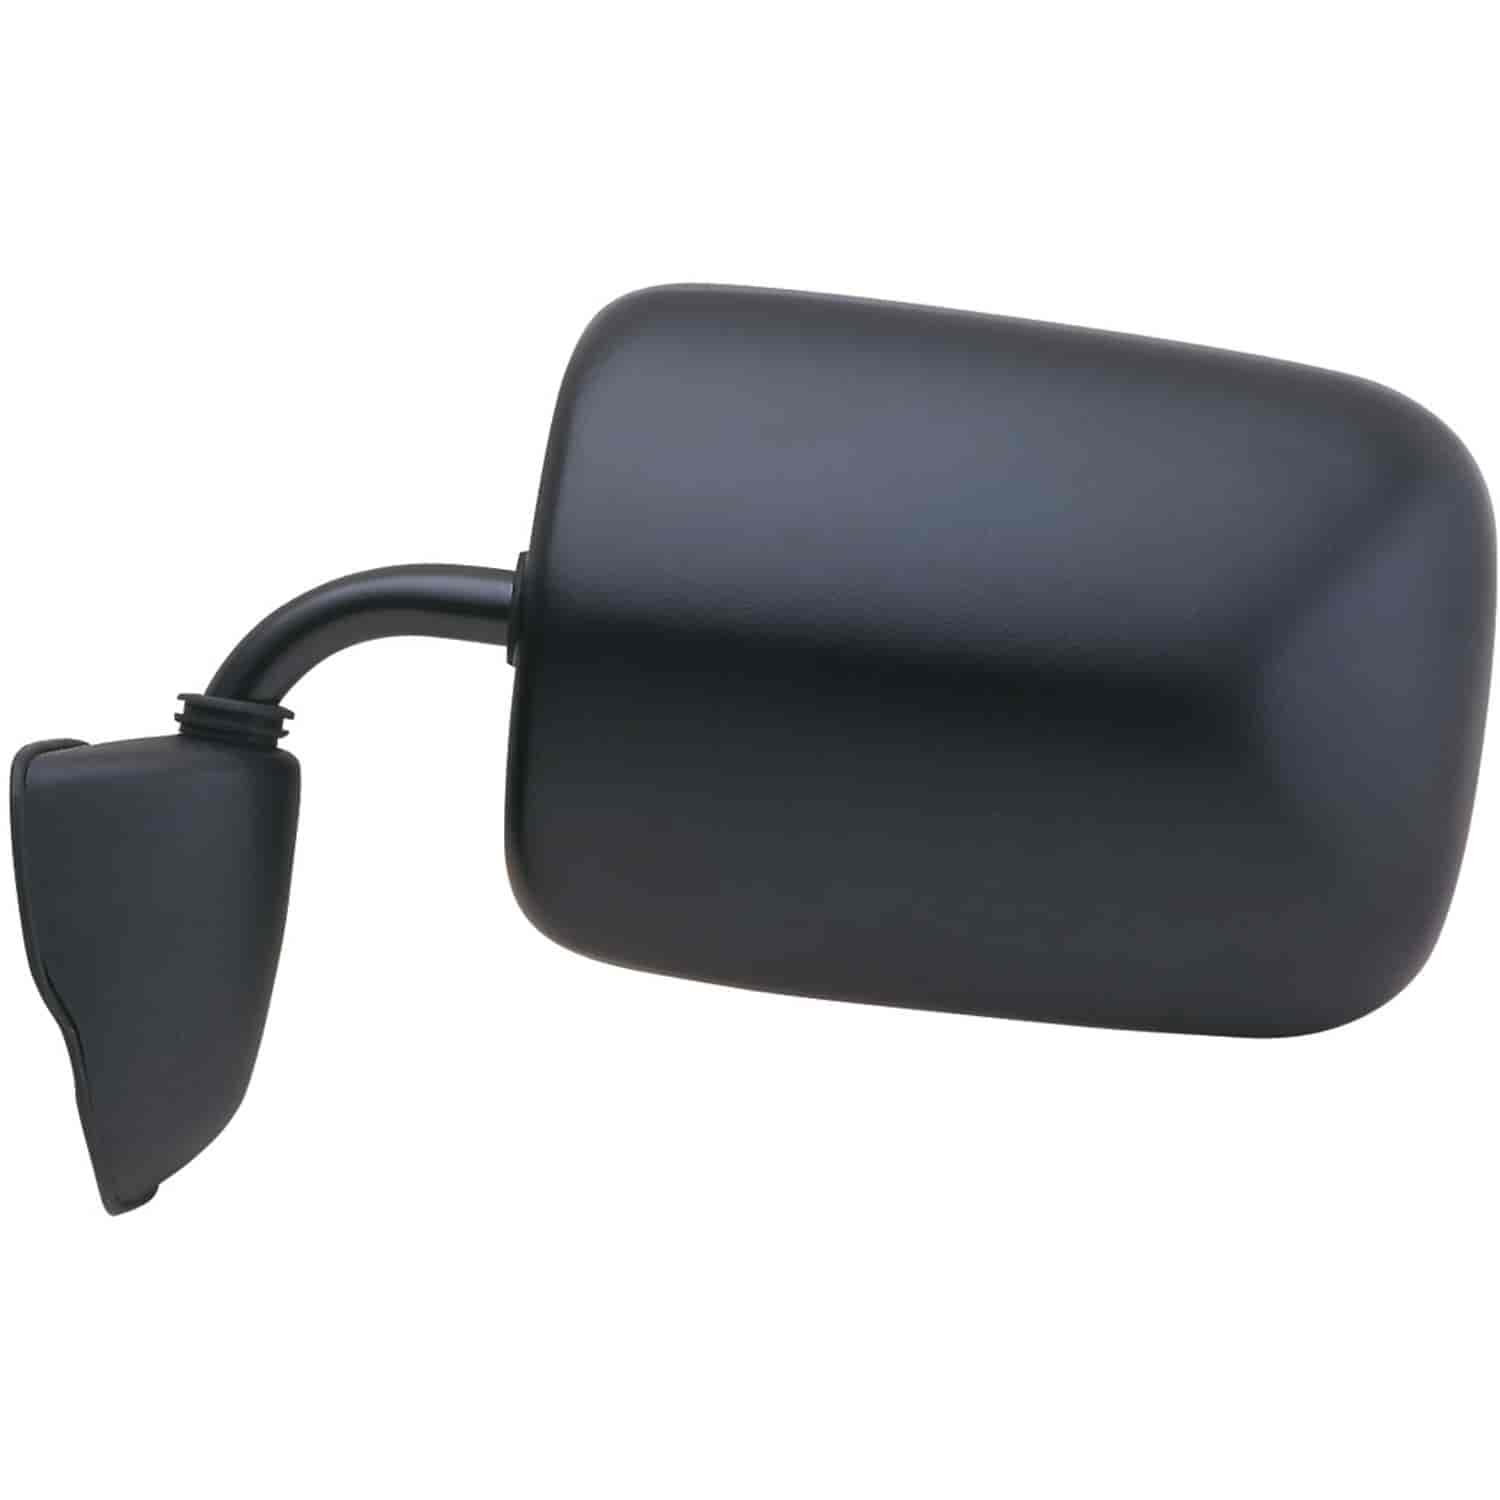 OEM Style Replacement mirror for 93-97 Dodge Full Size Van driver side mirror tested to fit and func